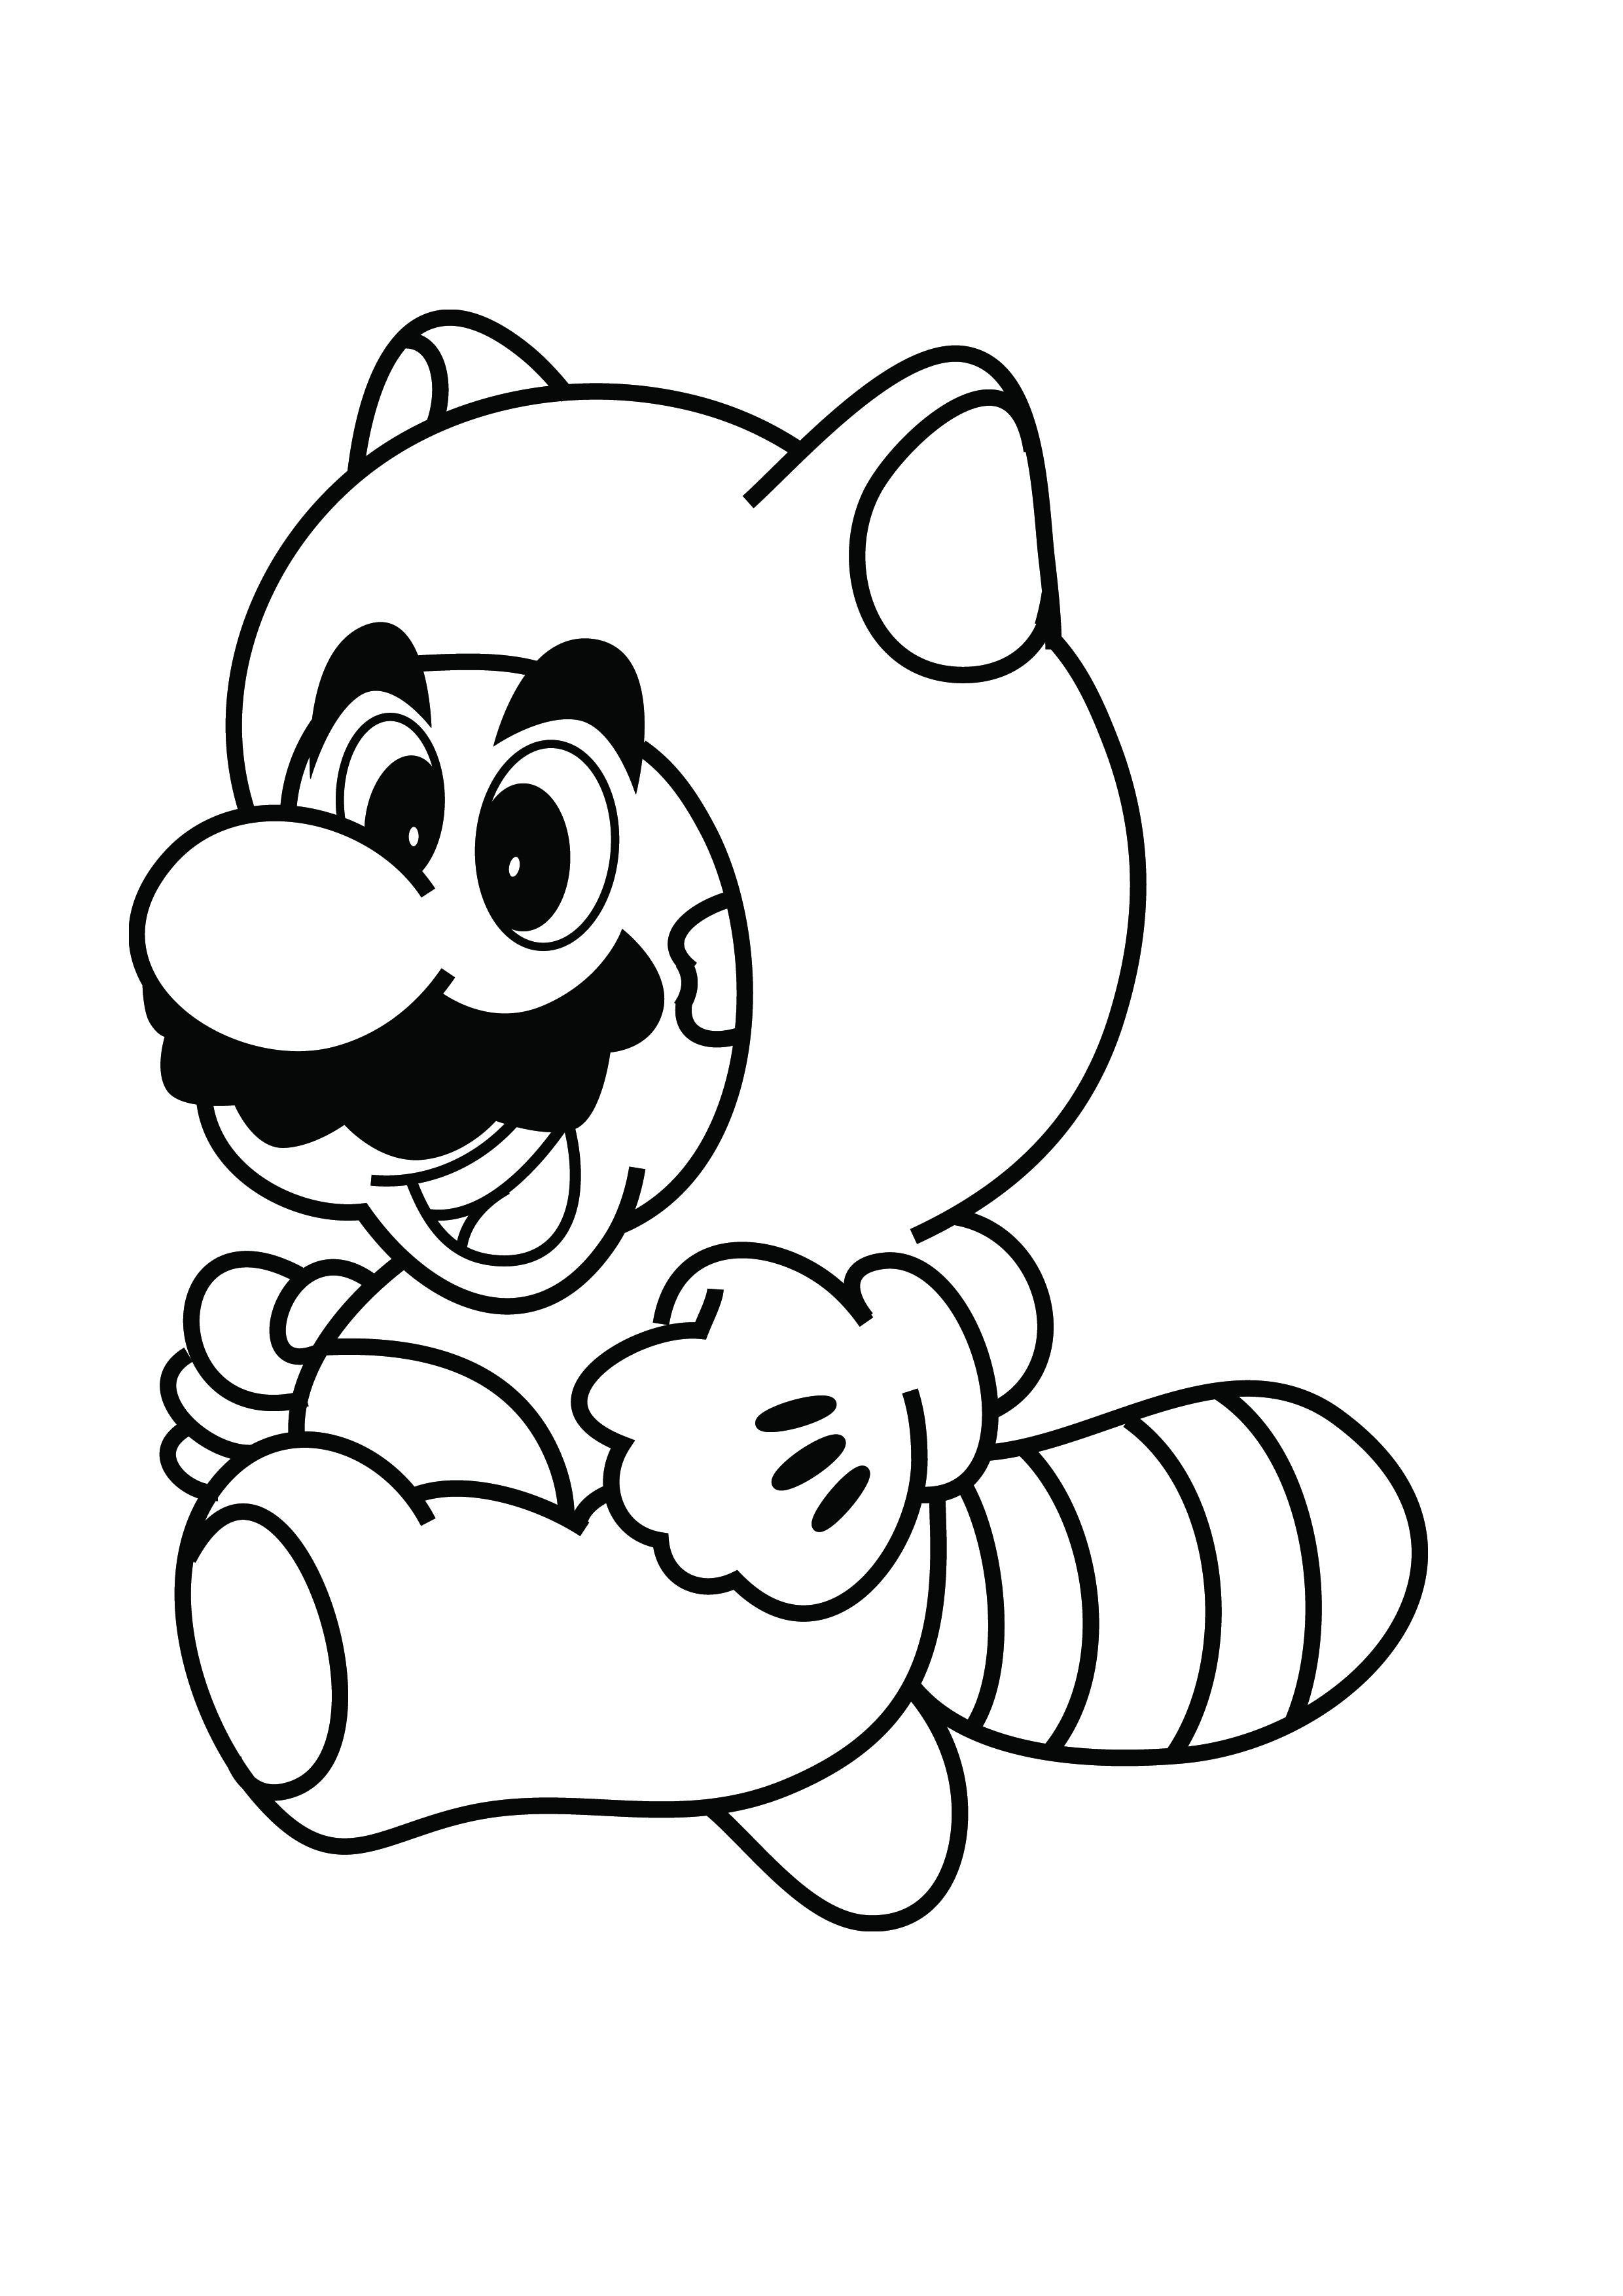 Super Mario Coloring Book
 Super Mario Coloring Pages Best Coloring Pages For Kids